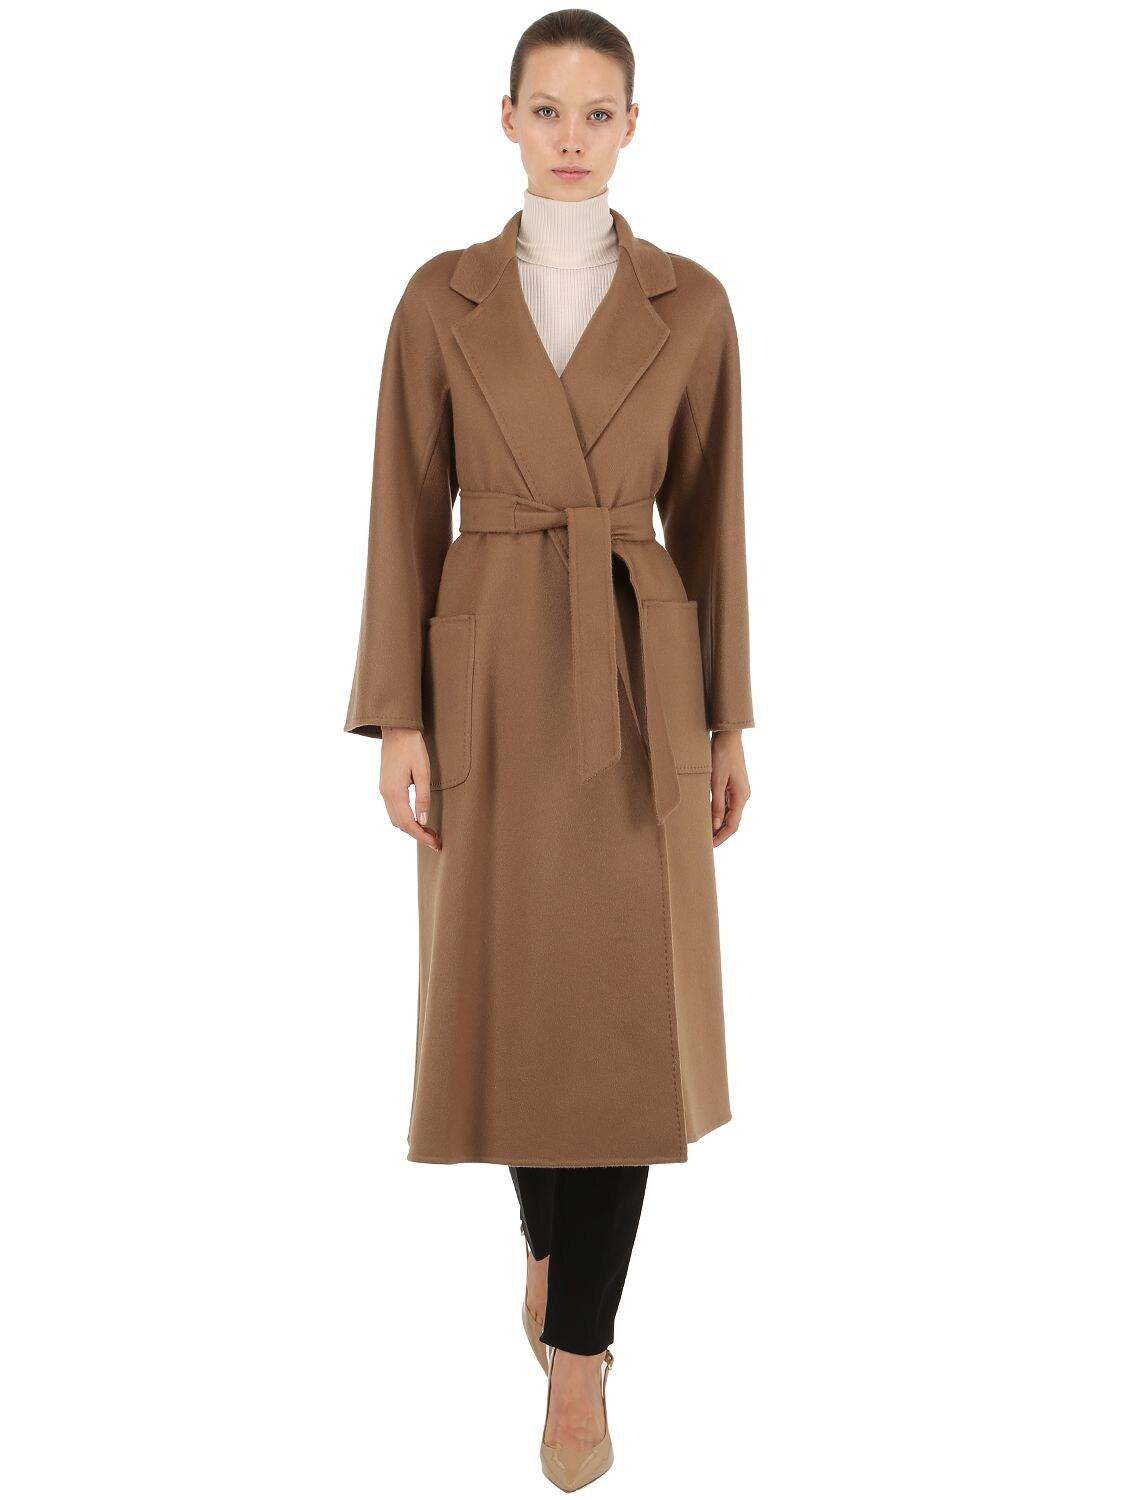 Max Mara Labbro Belted Cashmere Coat in Camel (Brown) - Lyst